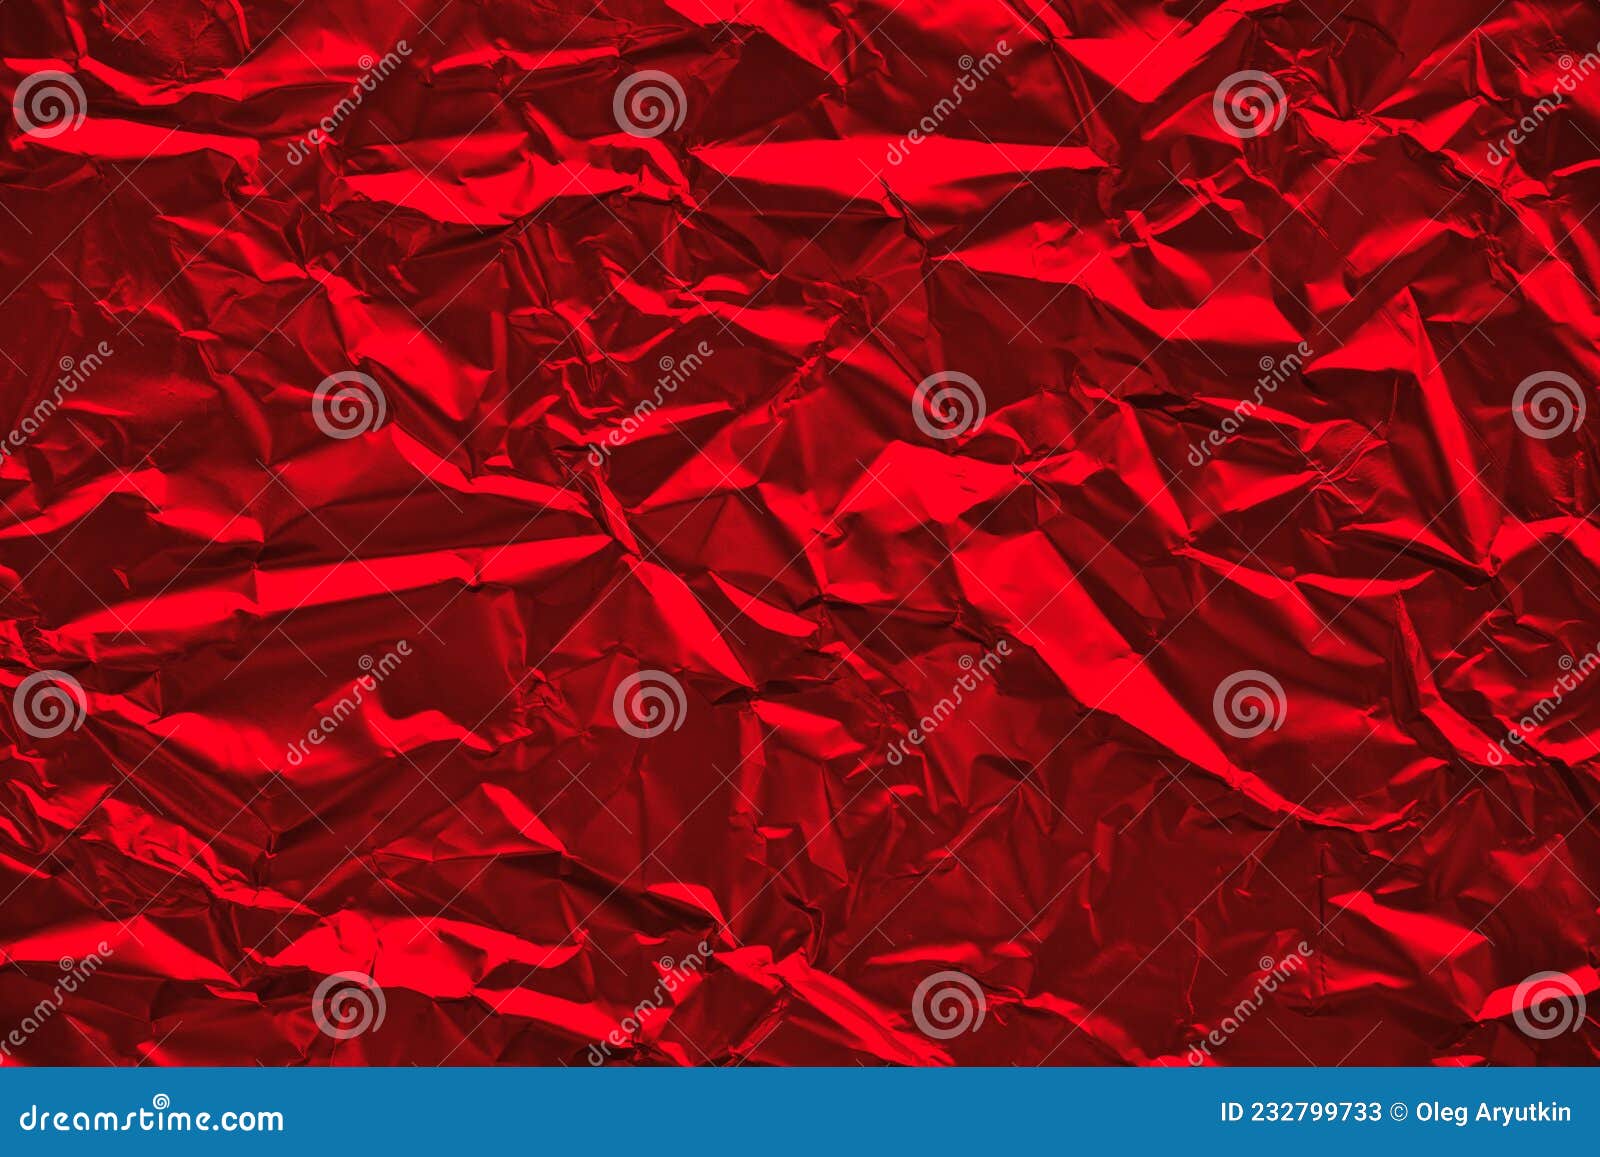 https://thumbs.dreamstime.com/z/close-up-crumpled-silver-aluminum-foil-texture-red-tone-abstract-background-design-close-up-crumpled-silver-aluminum-232799733.jpg